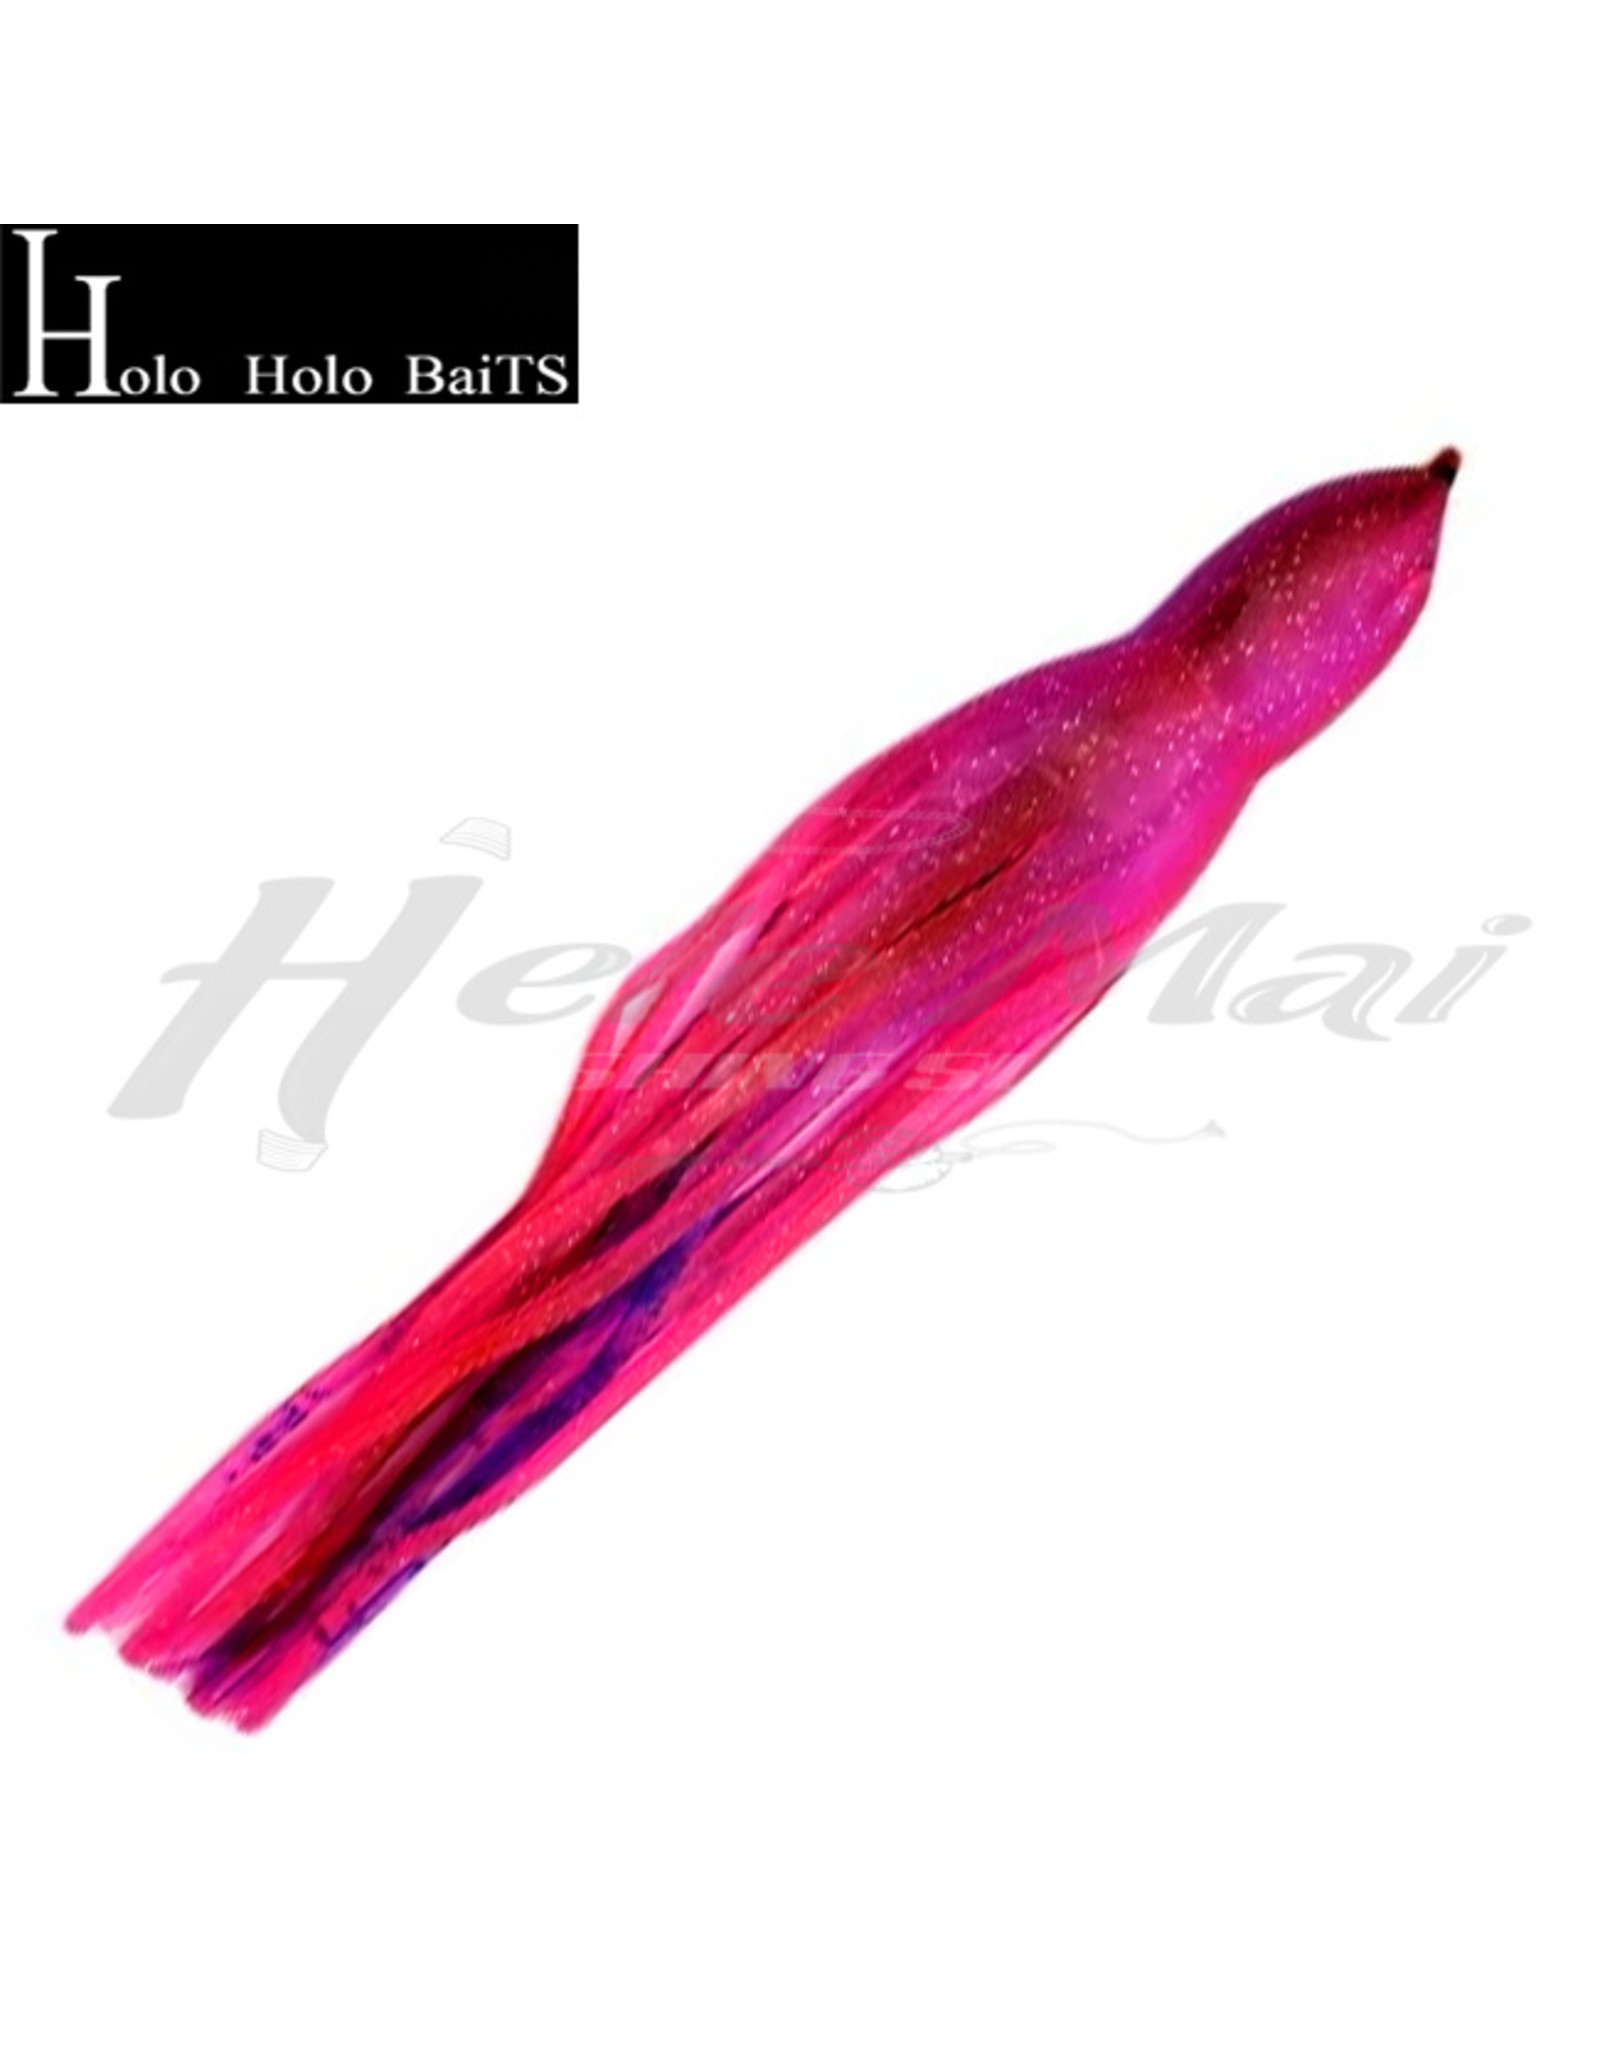 HOLO HOLO Squid Skirt, 7" Pink Plum Dots, 0655